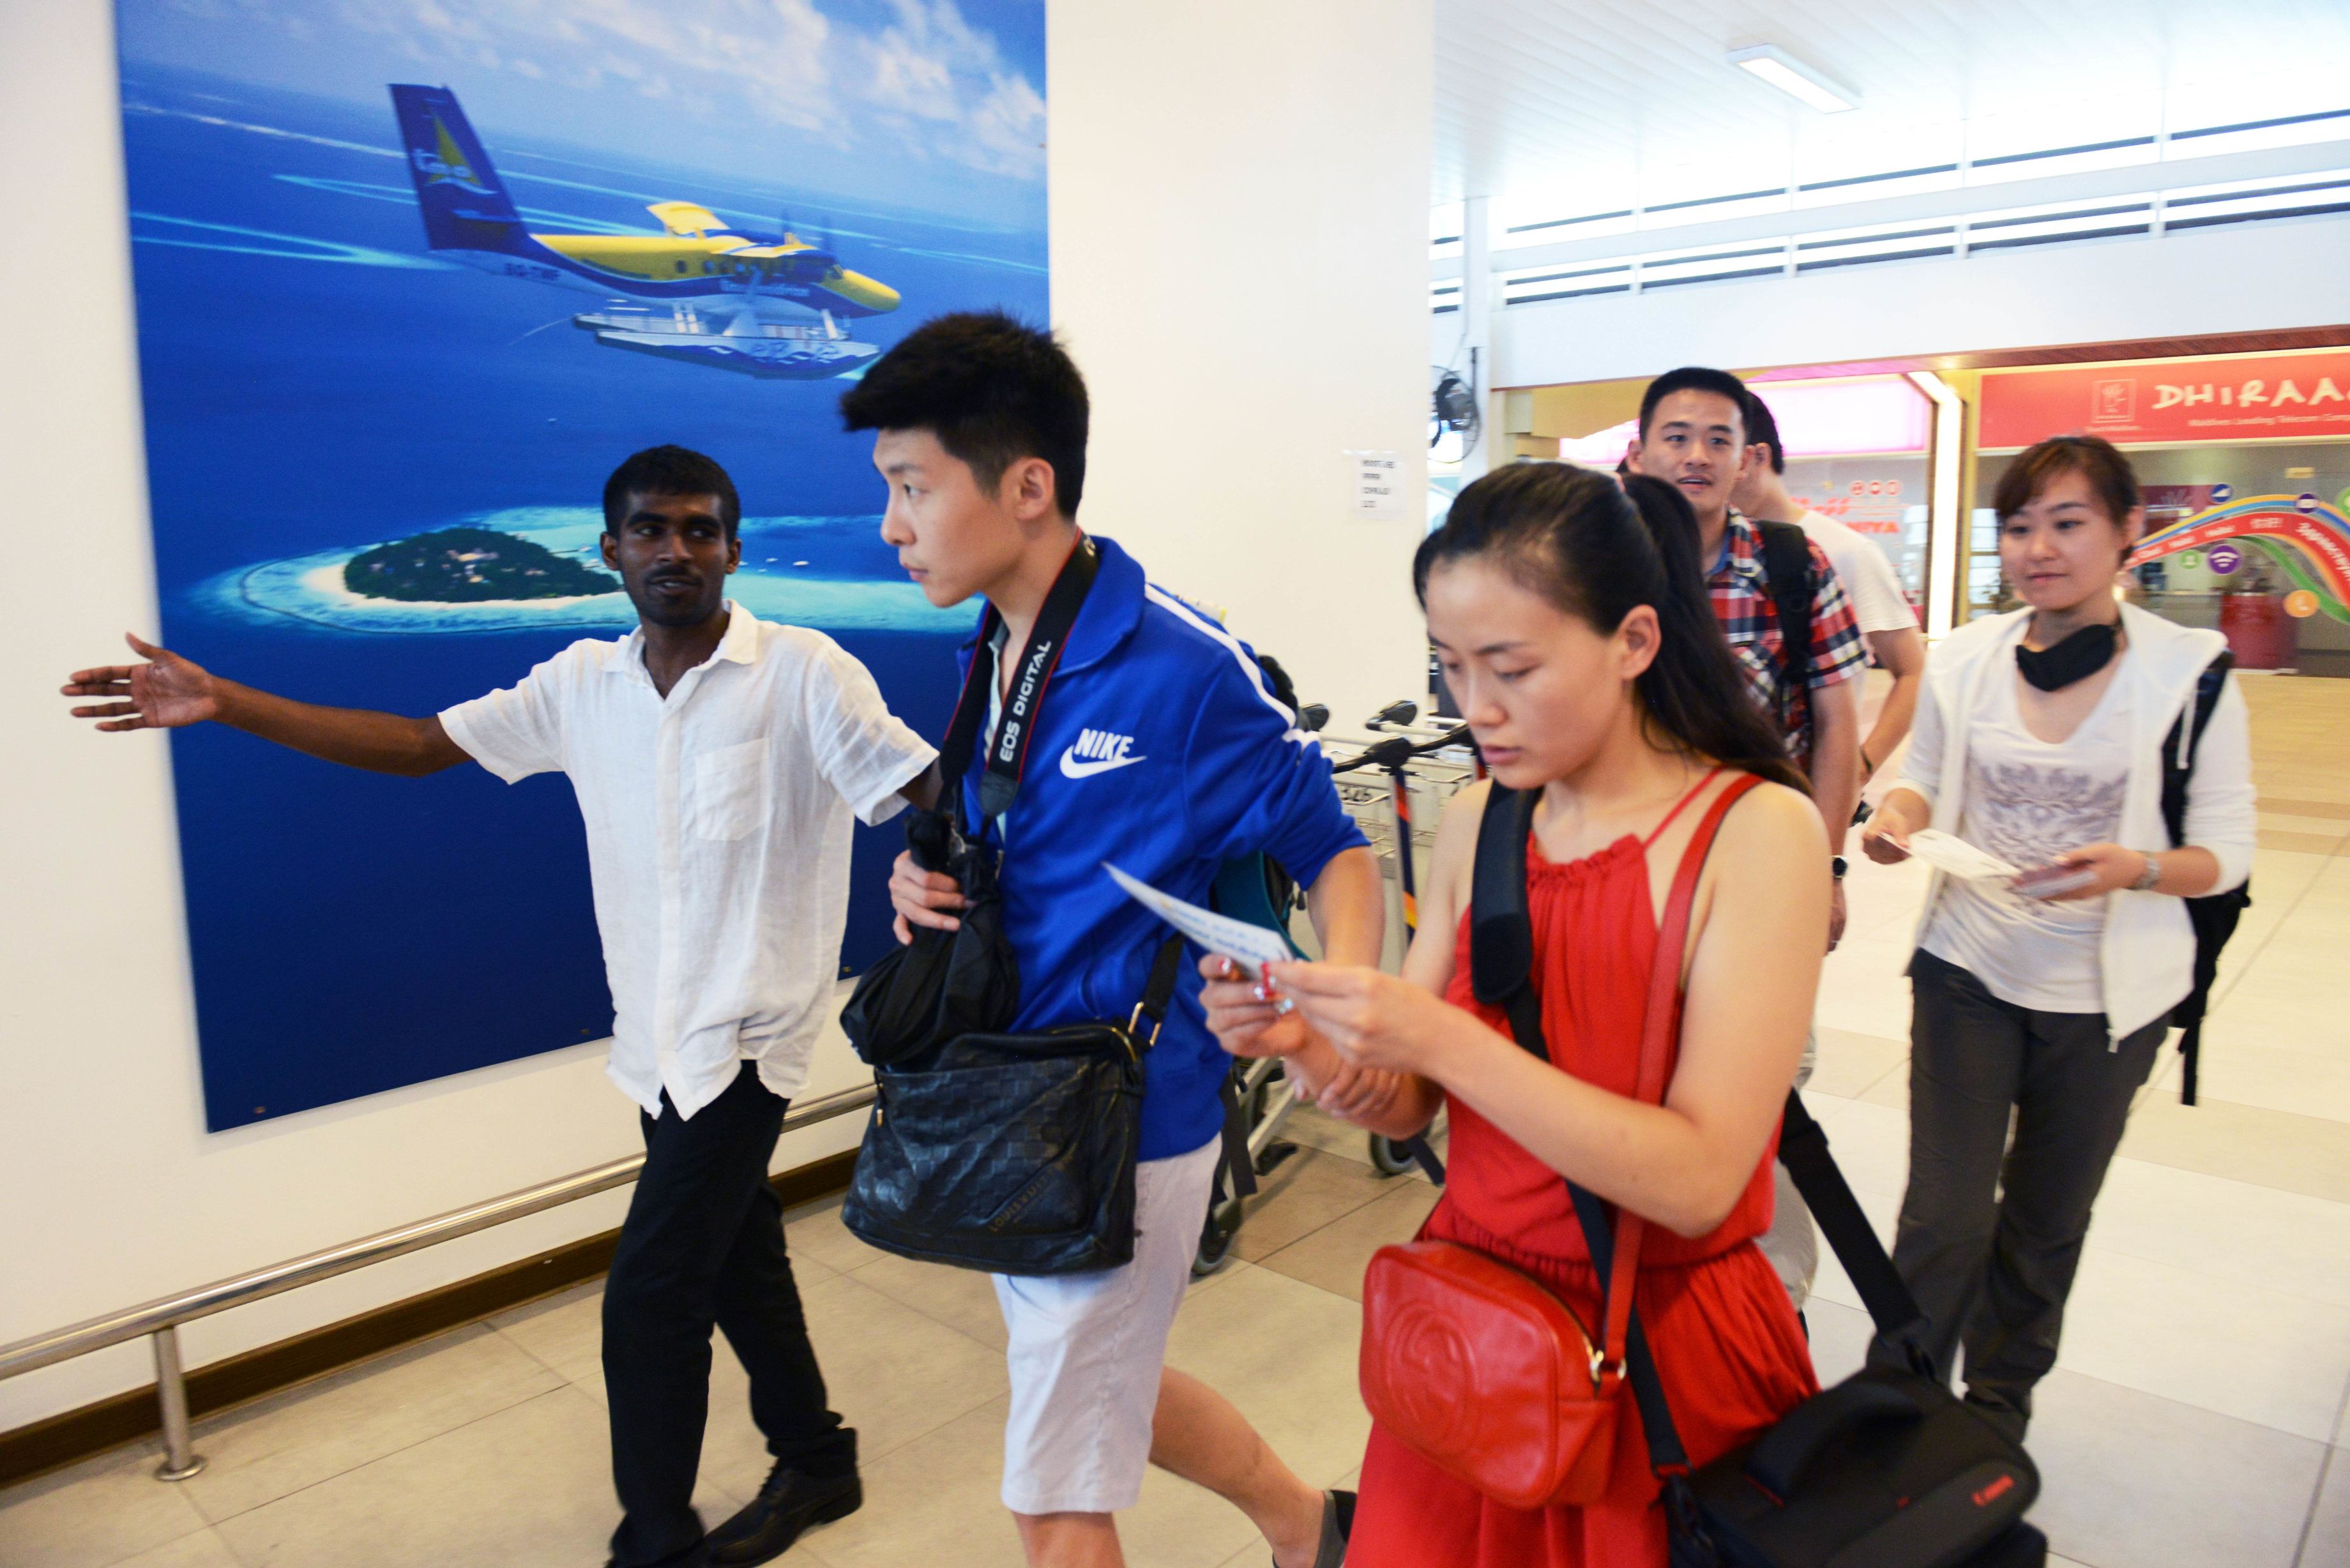 Mainland Chinese tourists often made to local newspapers for their bad behaviour. Photo: AFP